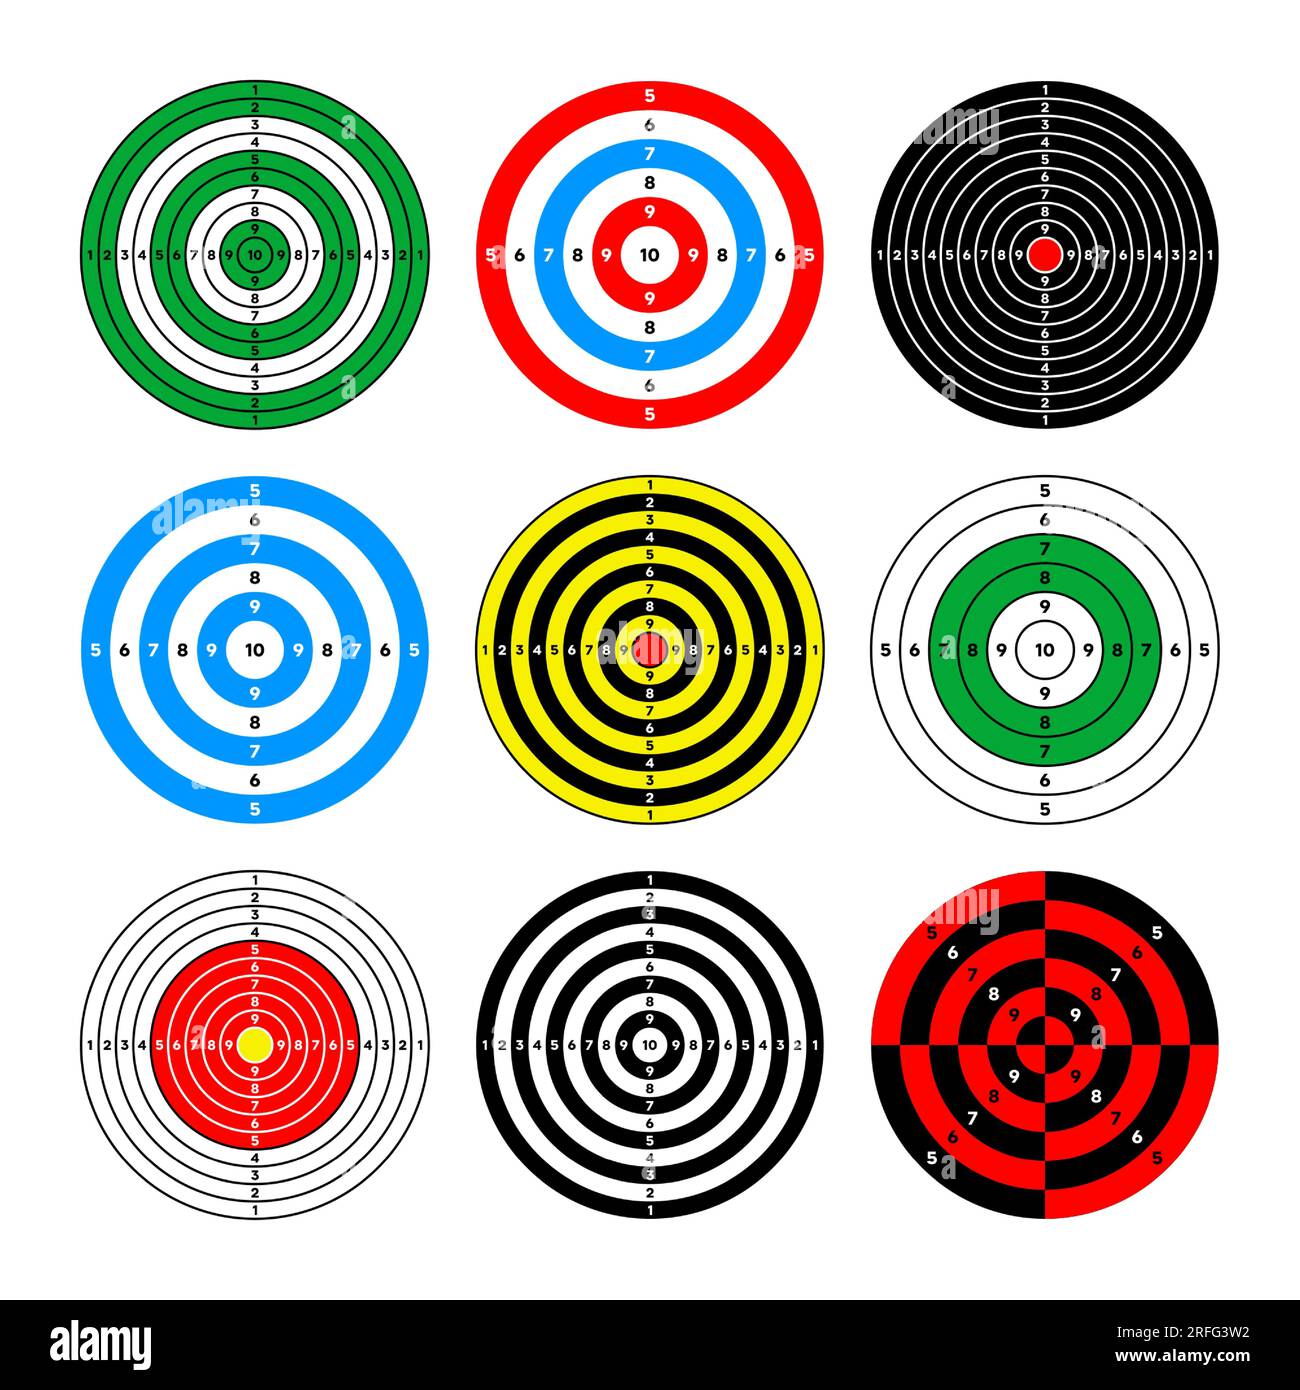 Shooting range paper targets. Round target with divisions, marks and numbers. Archery, gun shooting practise and training, sport competition and Stock Vector